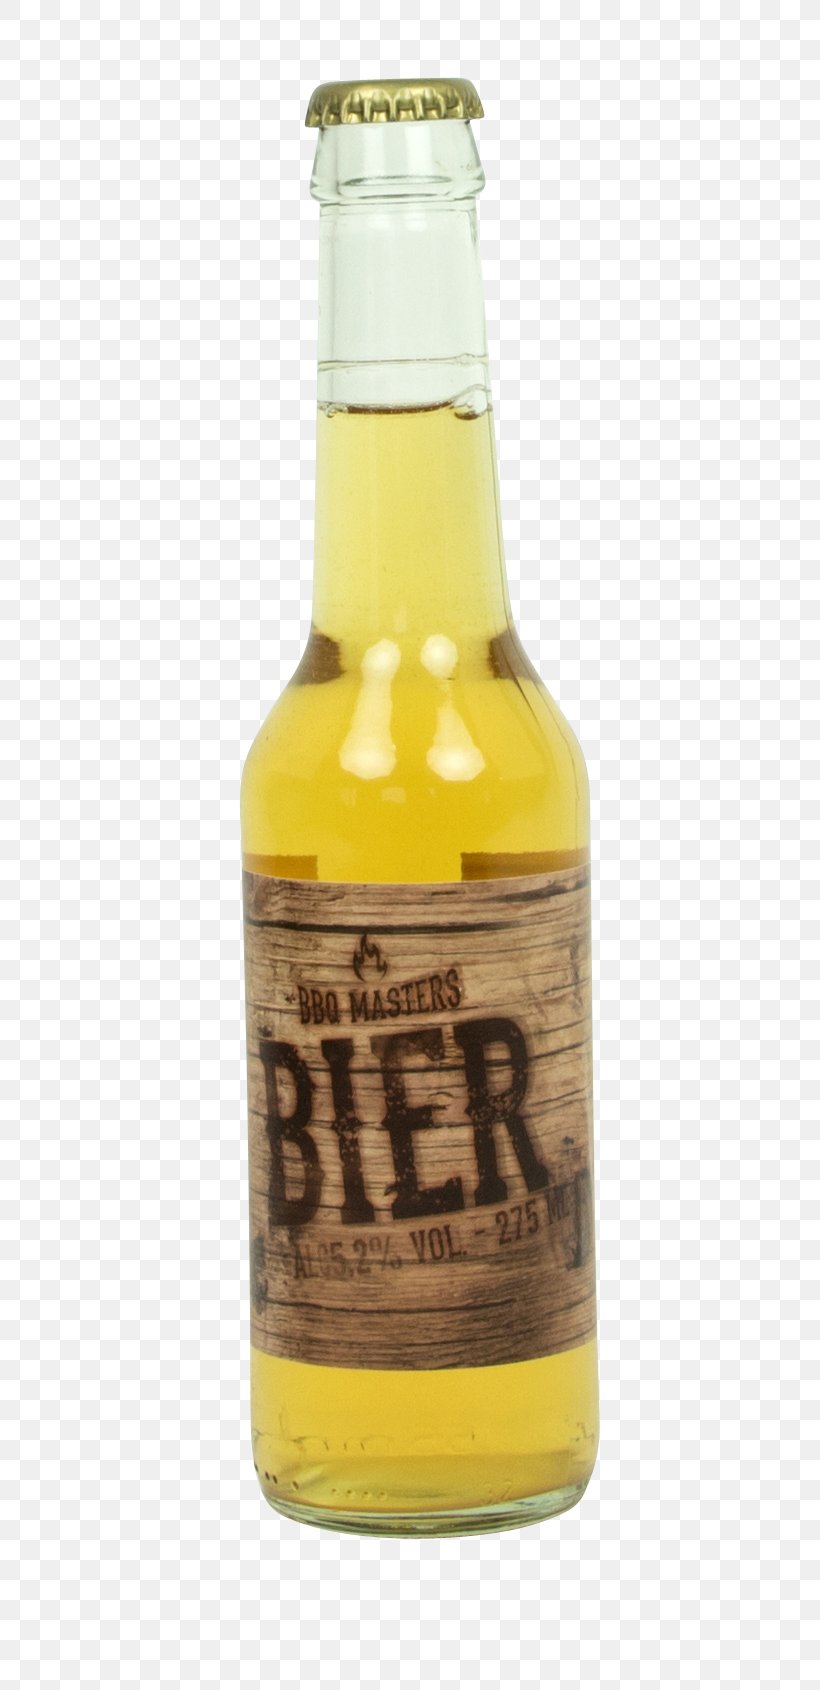 Barbecue Sauce Beer Bottle Peanut Sauce, PNG, 778x1690px, Barbecue, Barbecue Sauce, Beer, Beer Bottle, Bottle Download Free